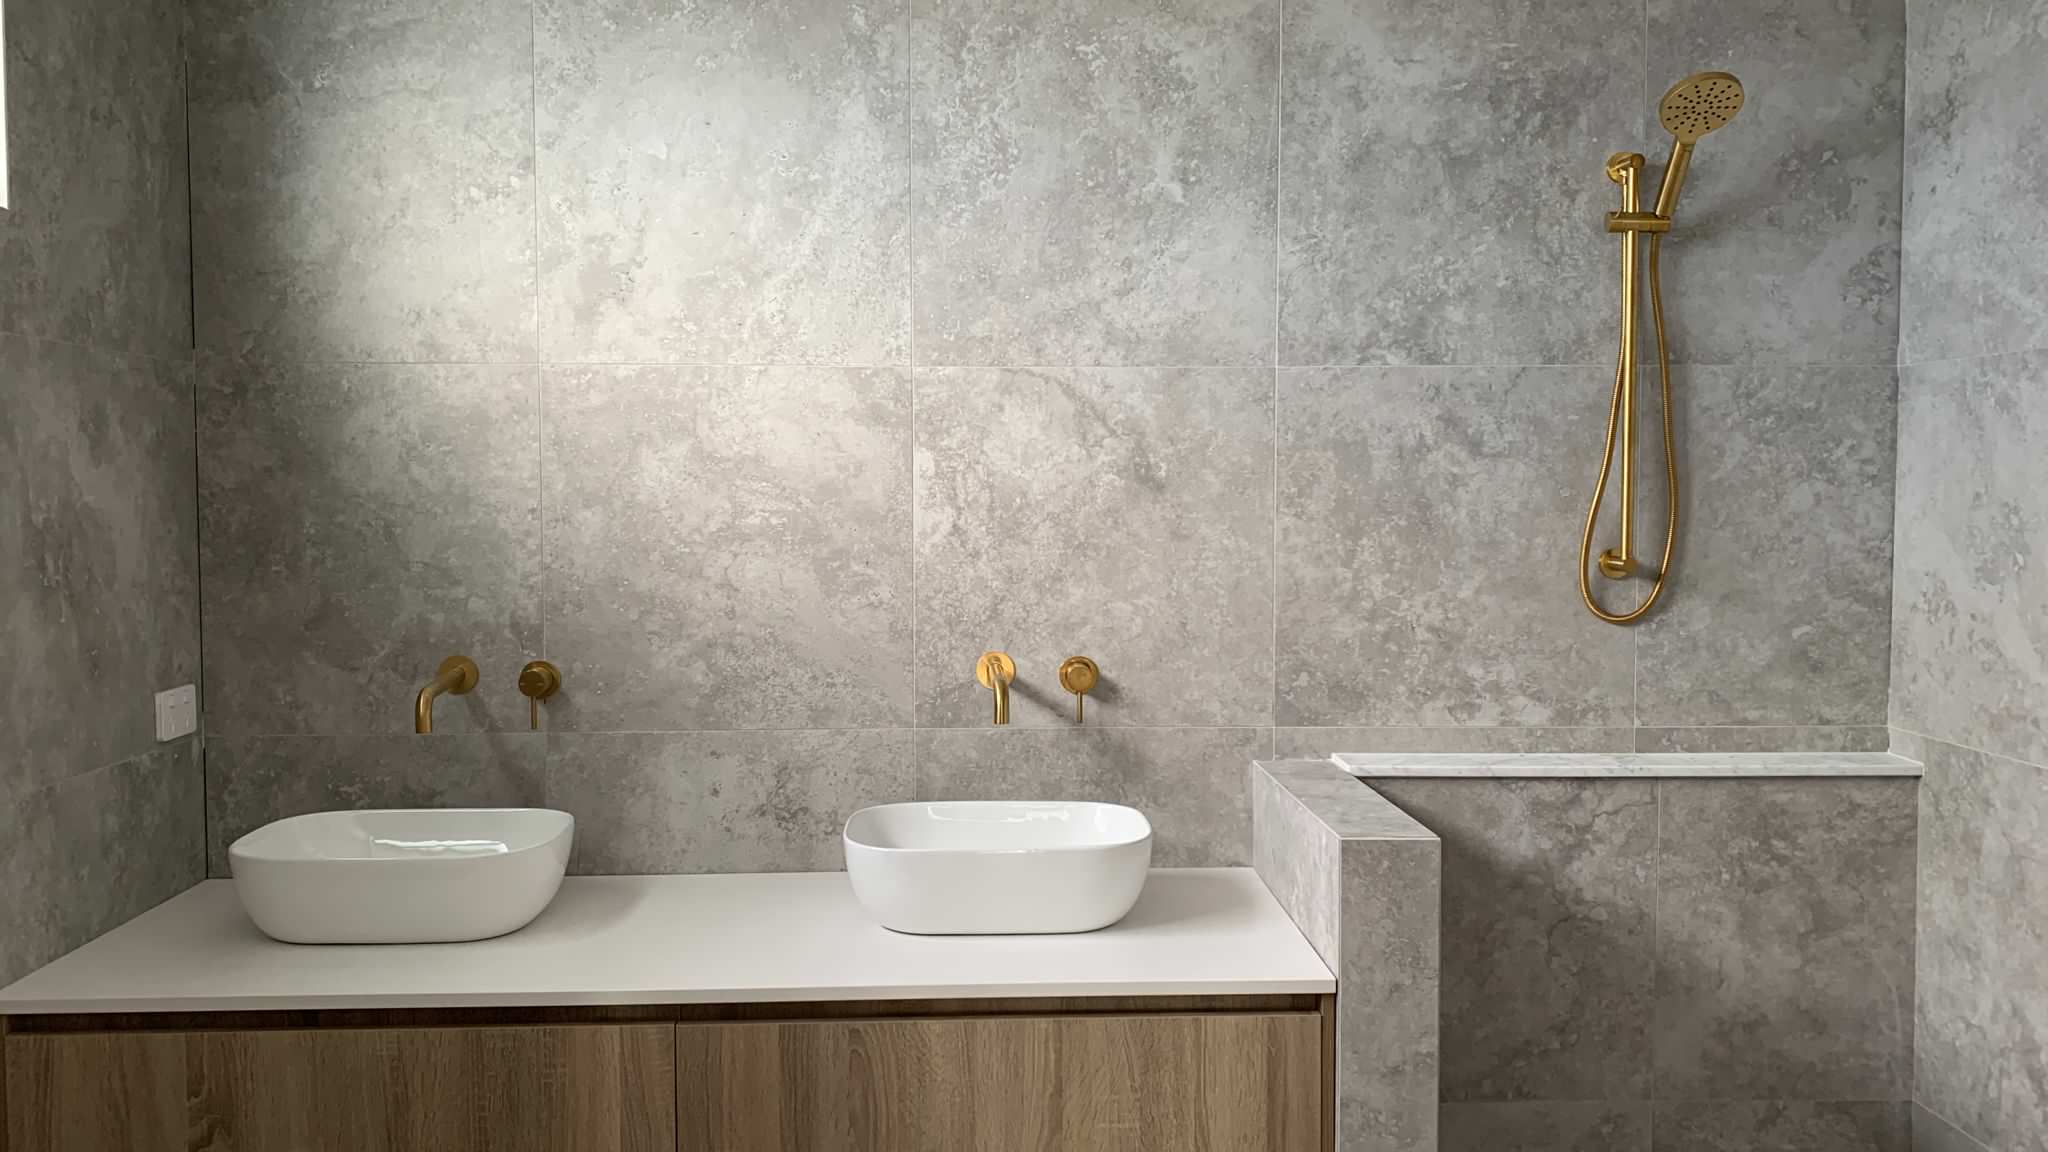 Modern & timeless custom designed bathroom ensuite with luxurious brushed brass tapware and quality finishes all around.